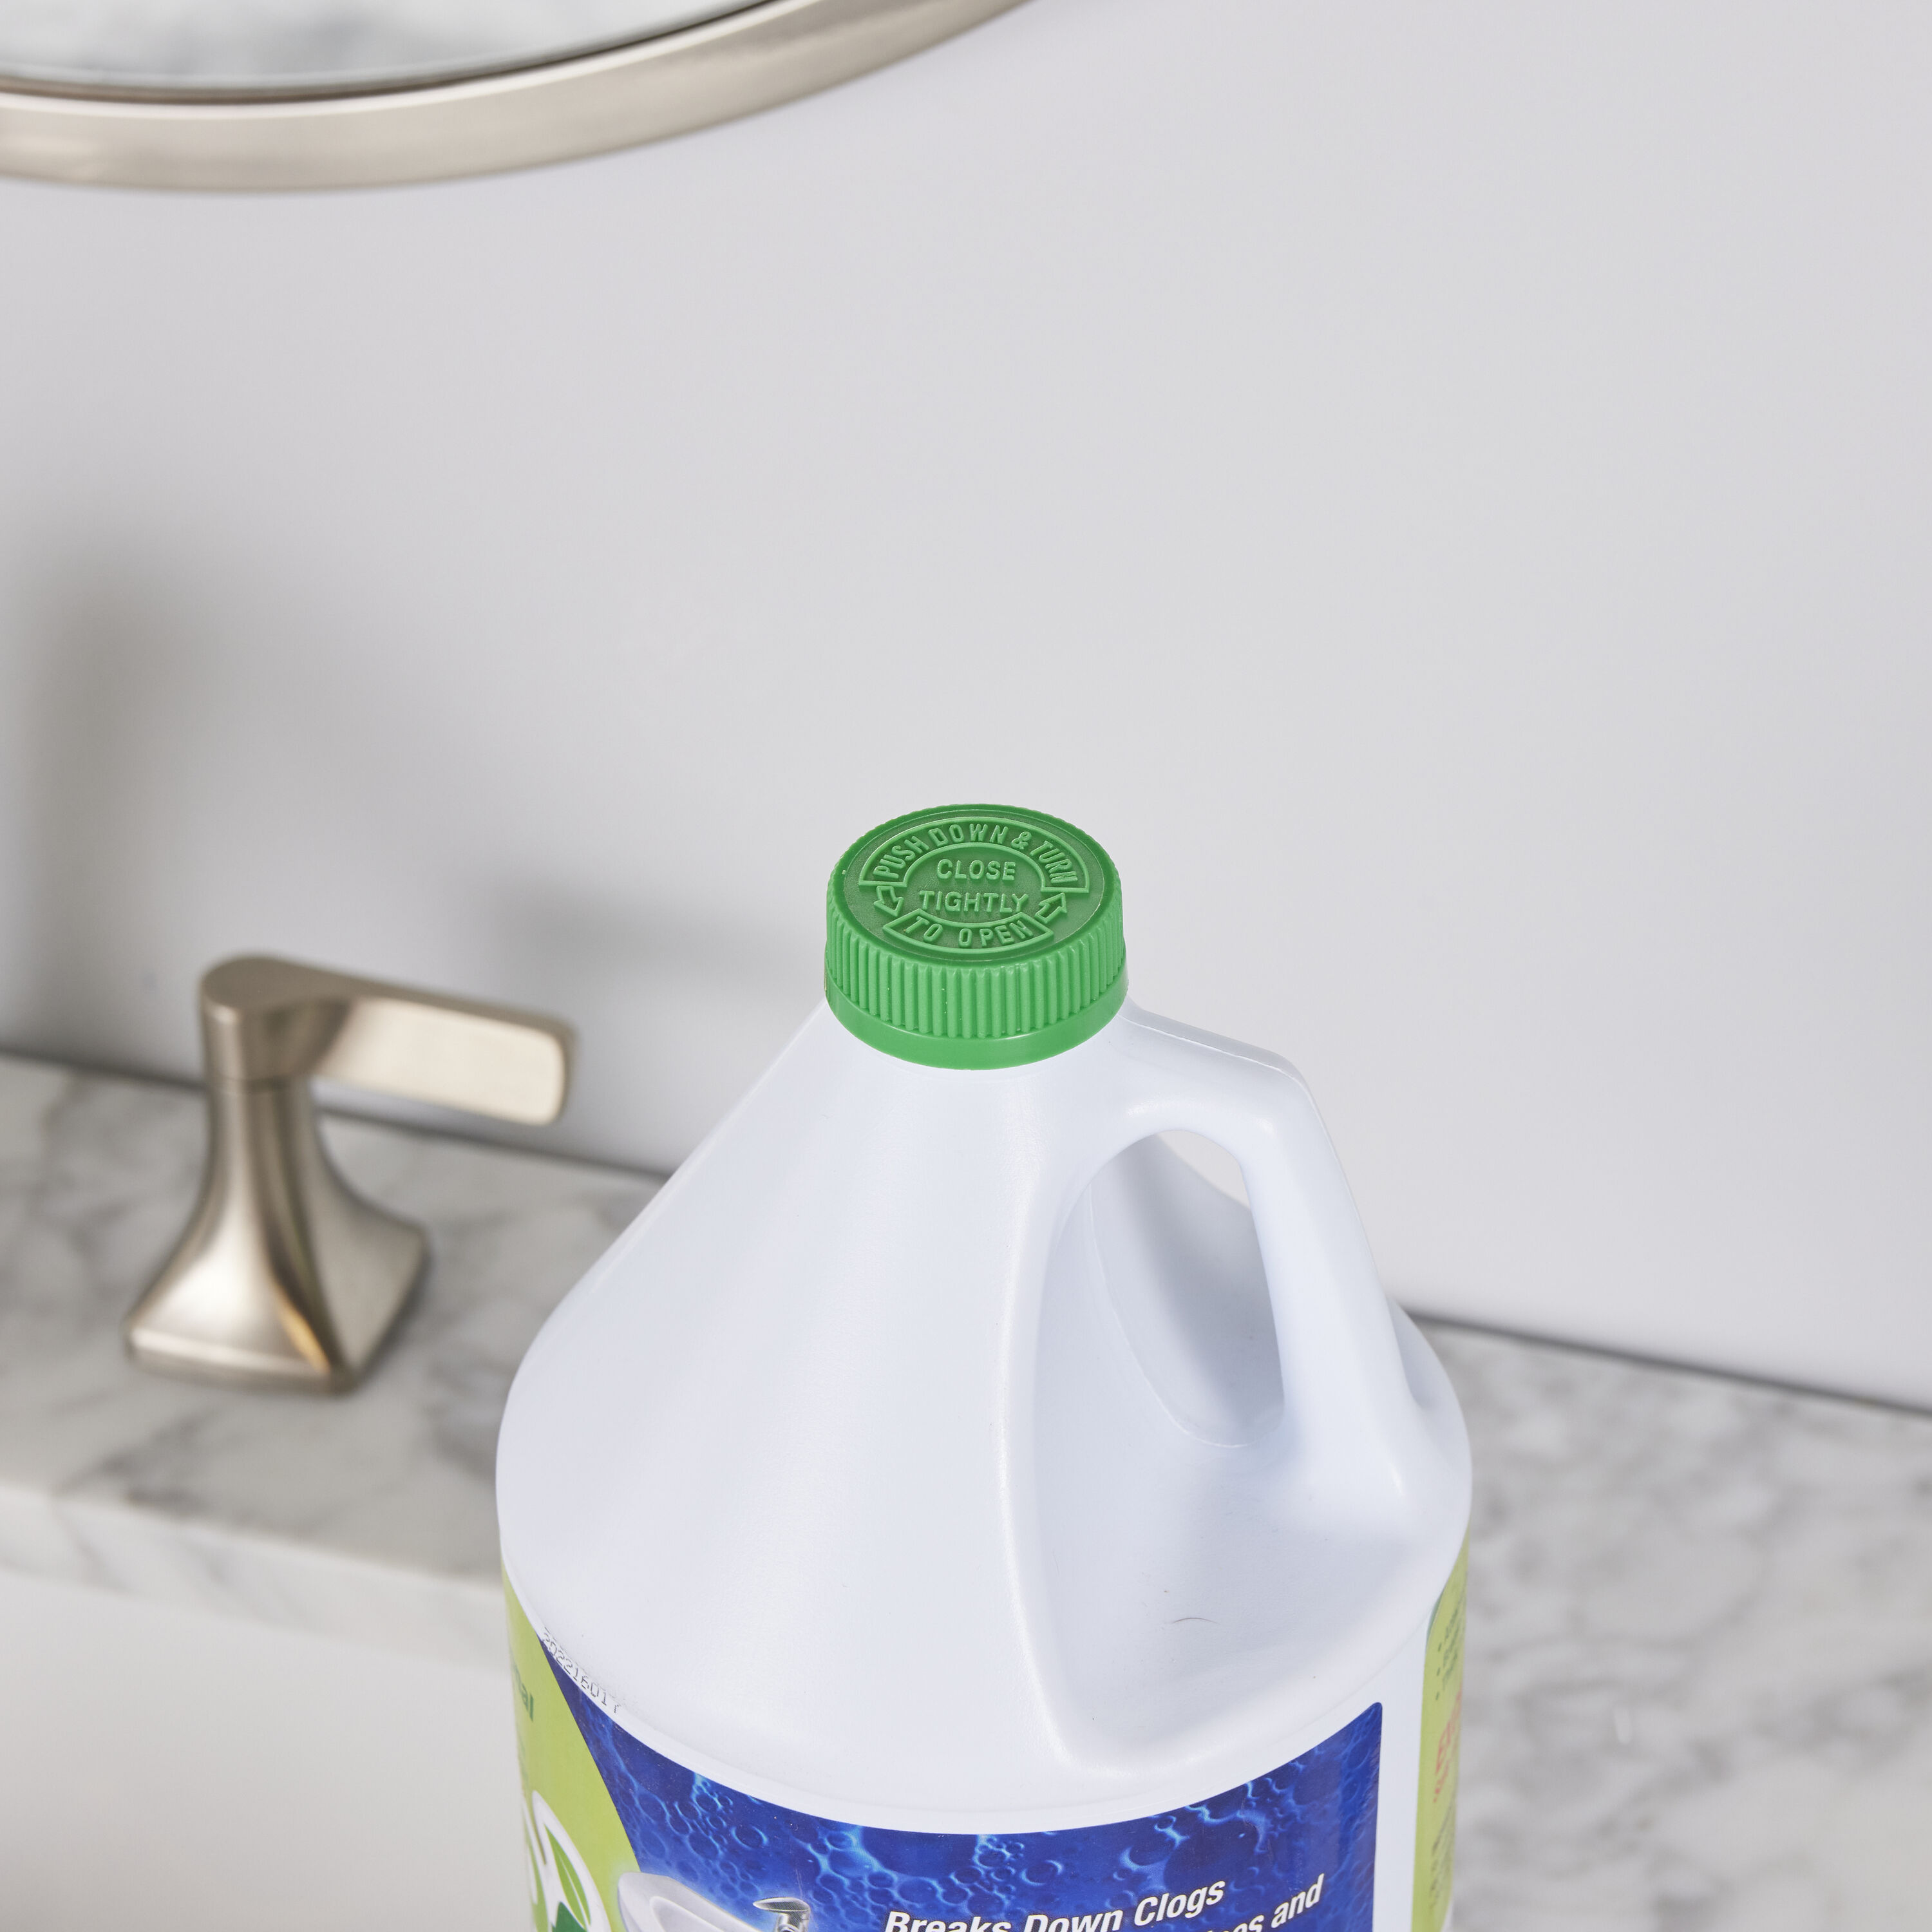 Eco Punch Enzyme Drain Cleaner - 1 Gal